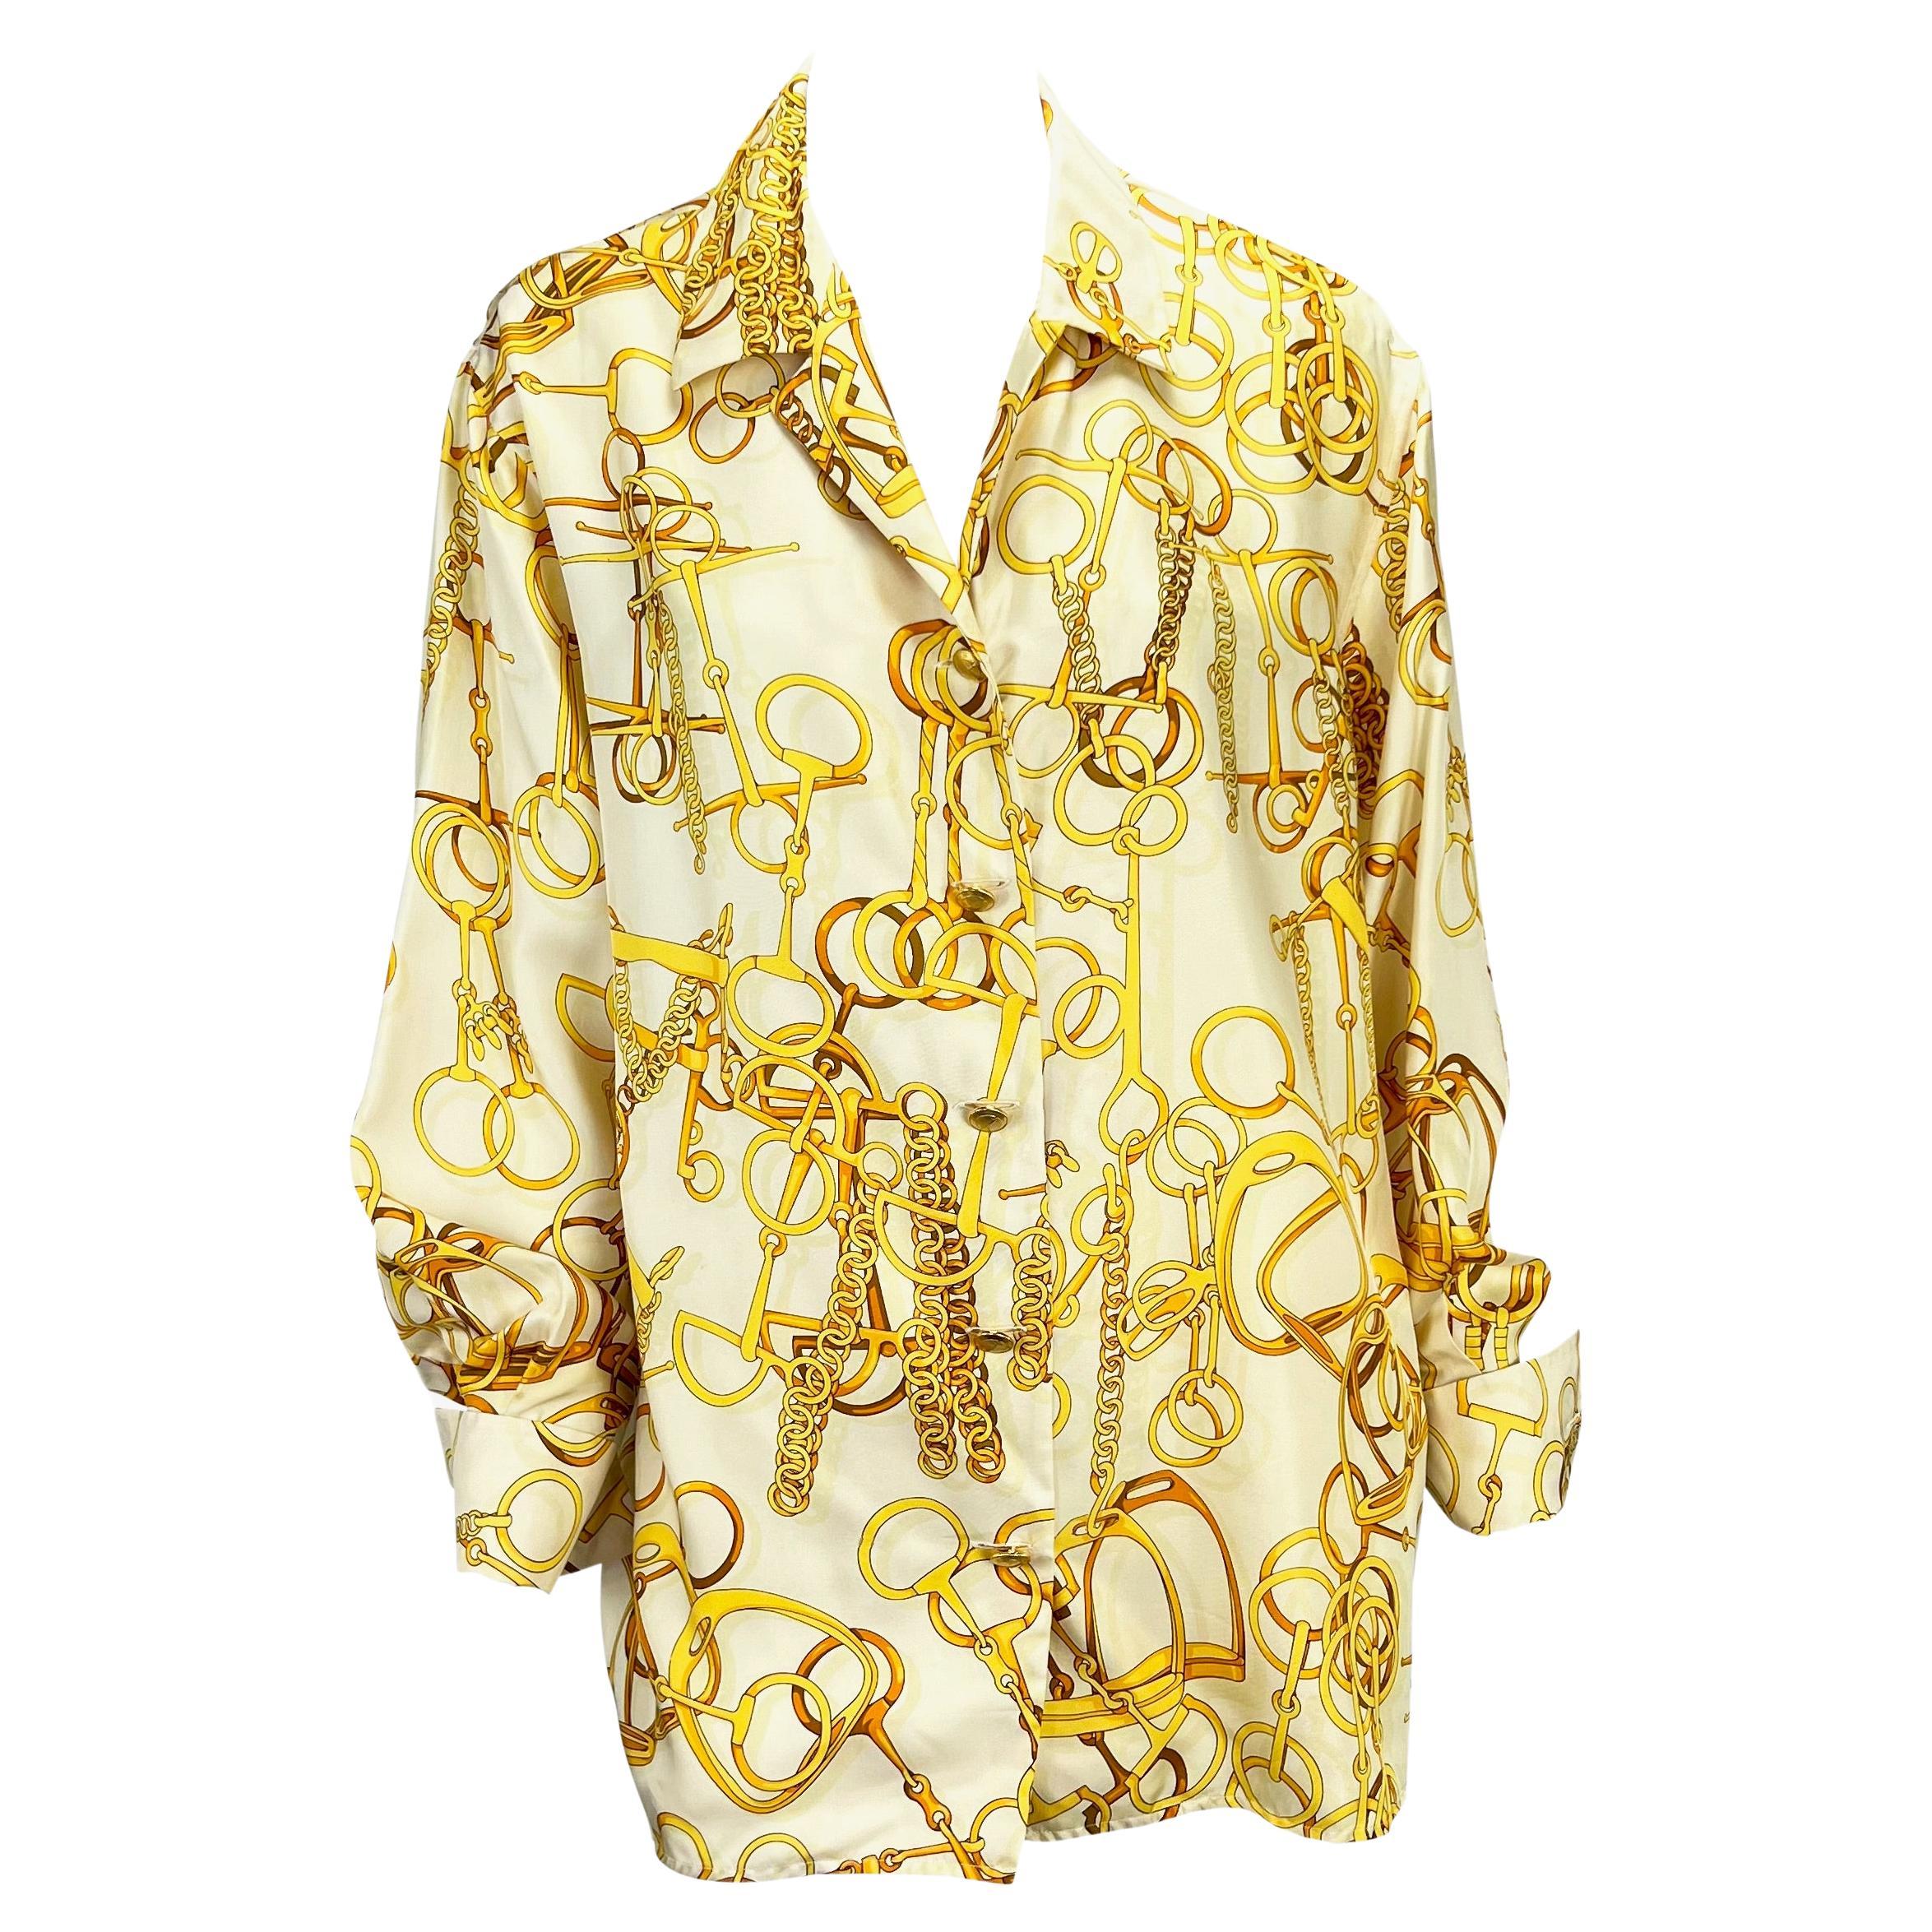 S/S 1993 Gucci White and Gold Horsebit Print Button Up French Cuff Top For Sale